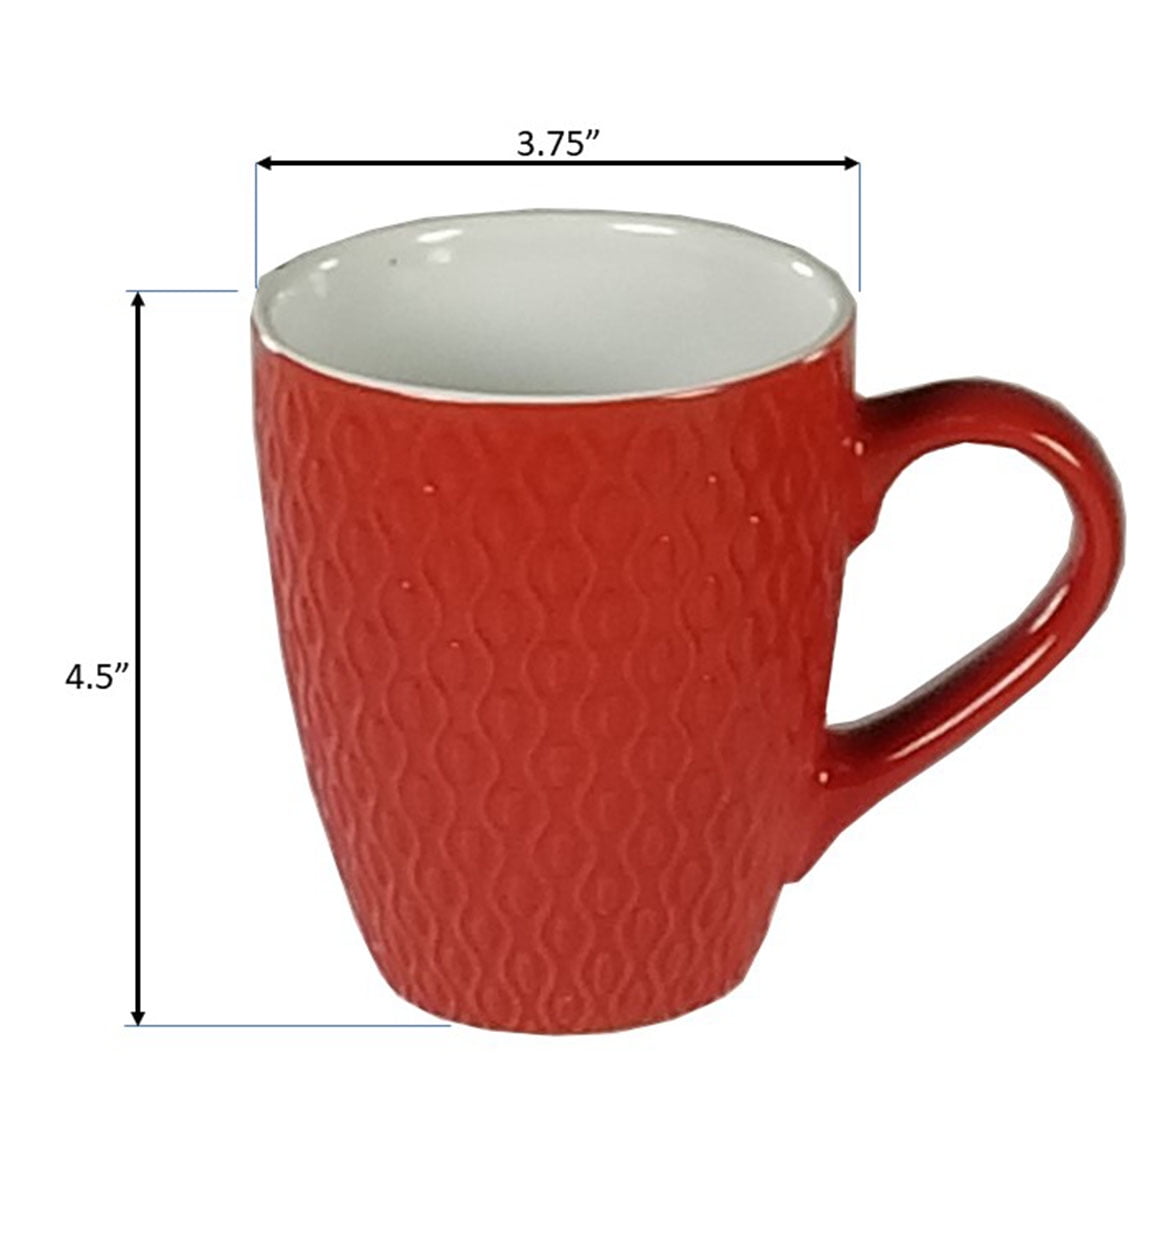  Cutiset 11 Ounce Ceramic Mug with Red Colors inside